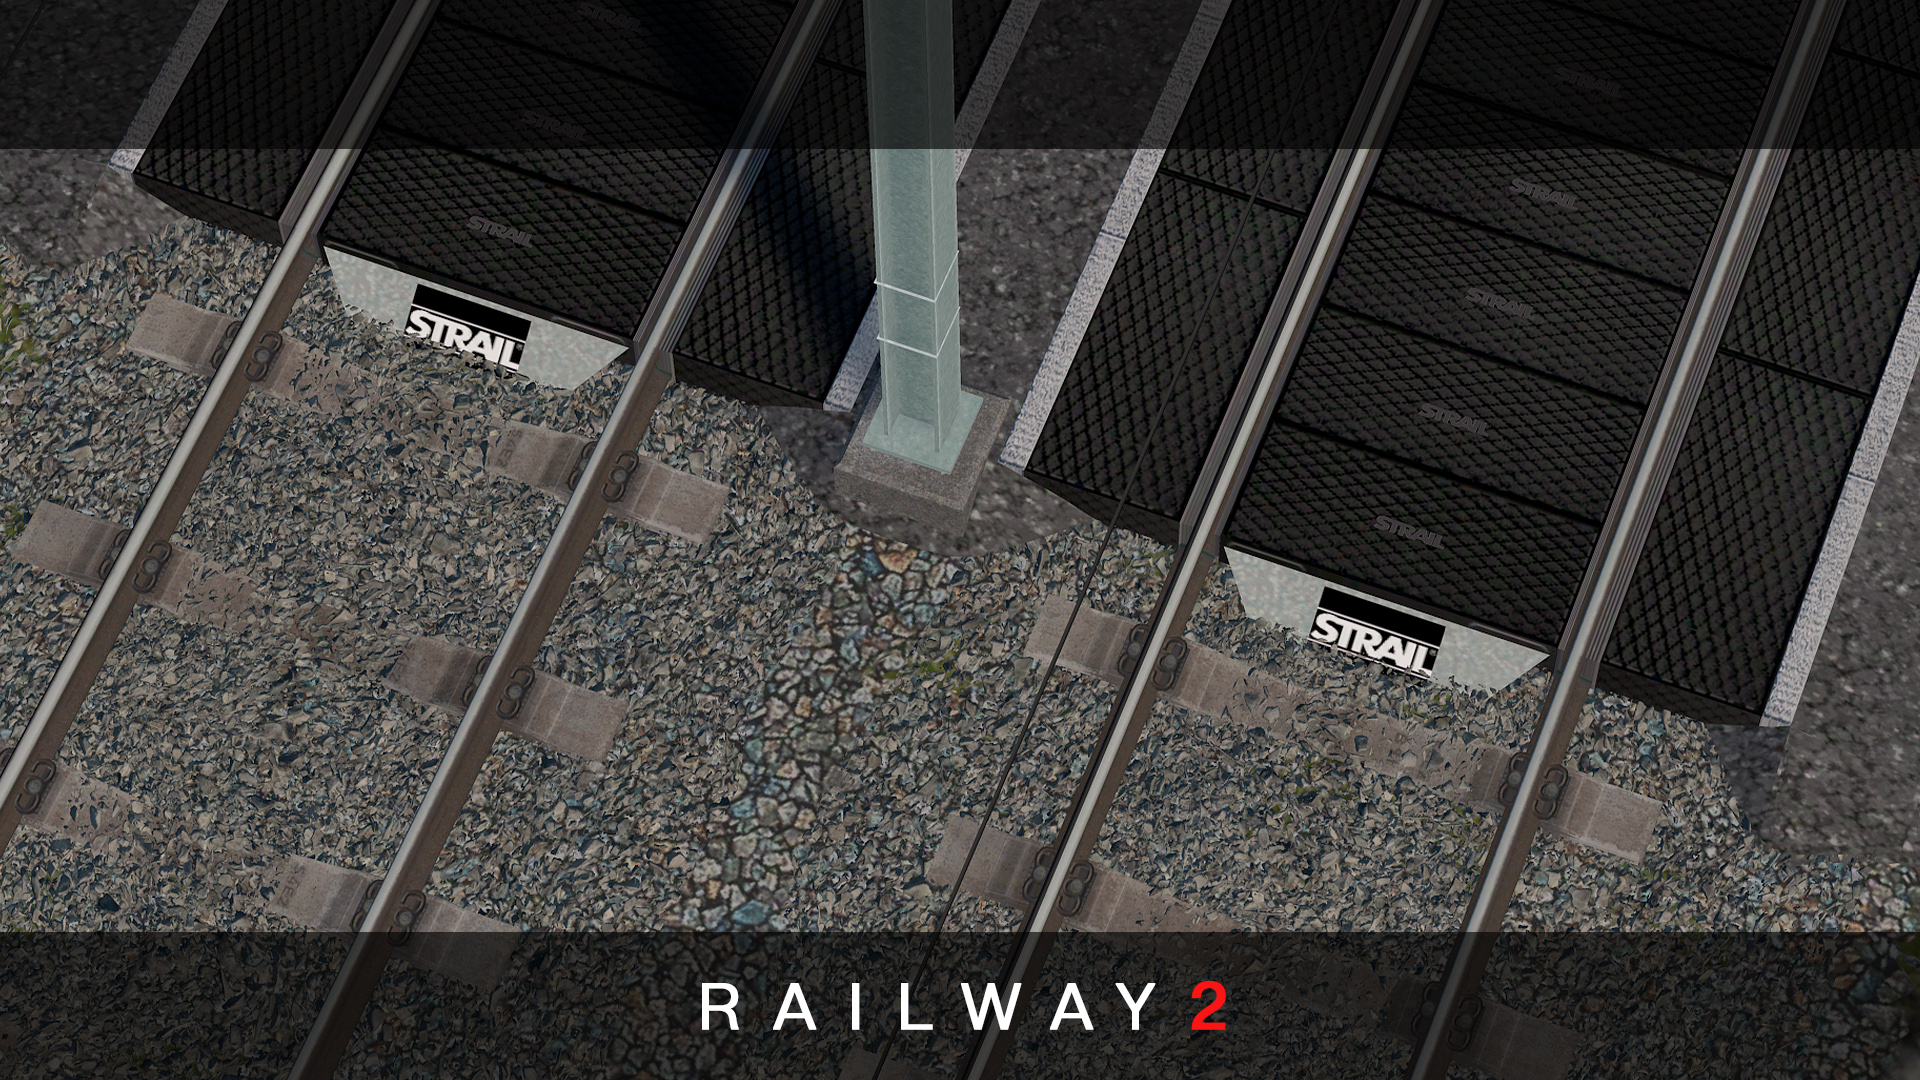 Cities: Skylines List of Railway 2 + Features + Modding Tutorial Information - 4.1 Networks: Core Features - 71118AE